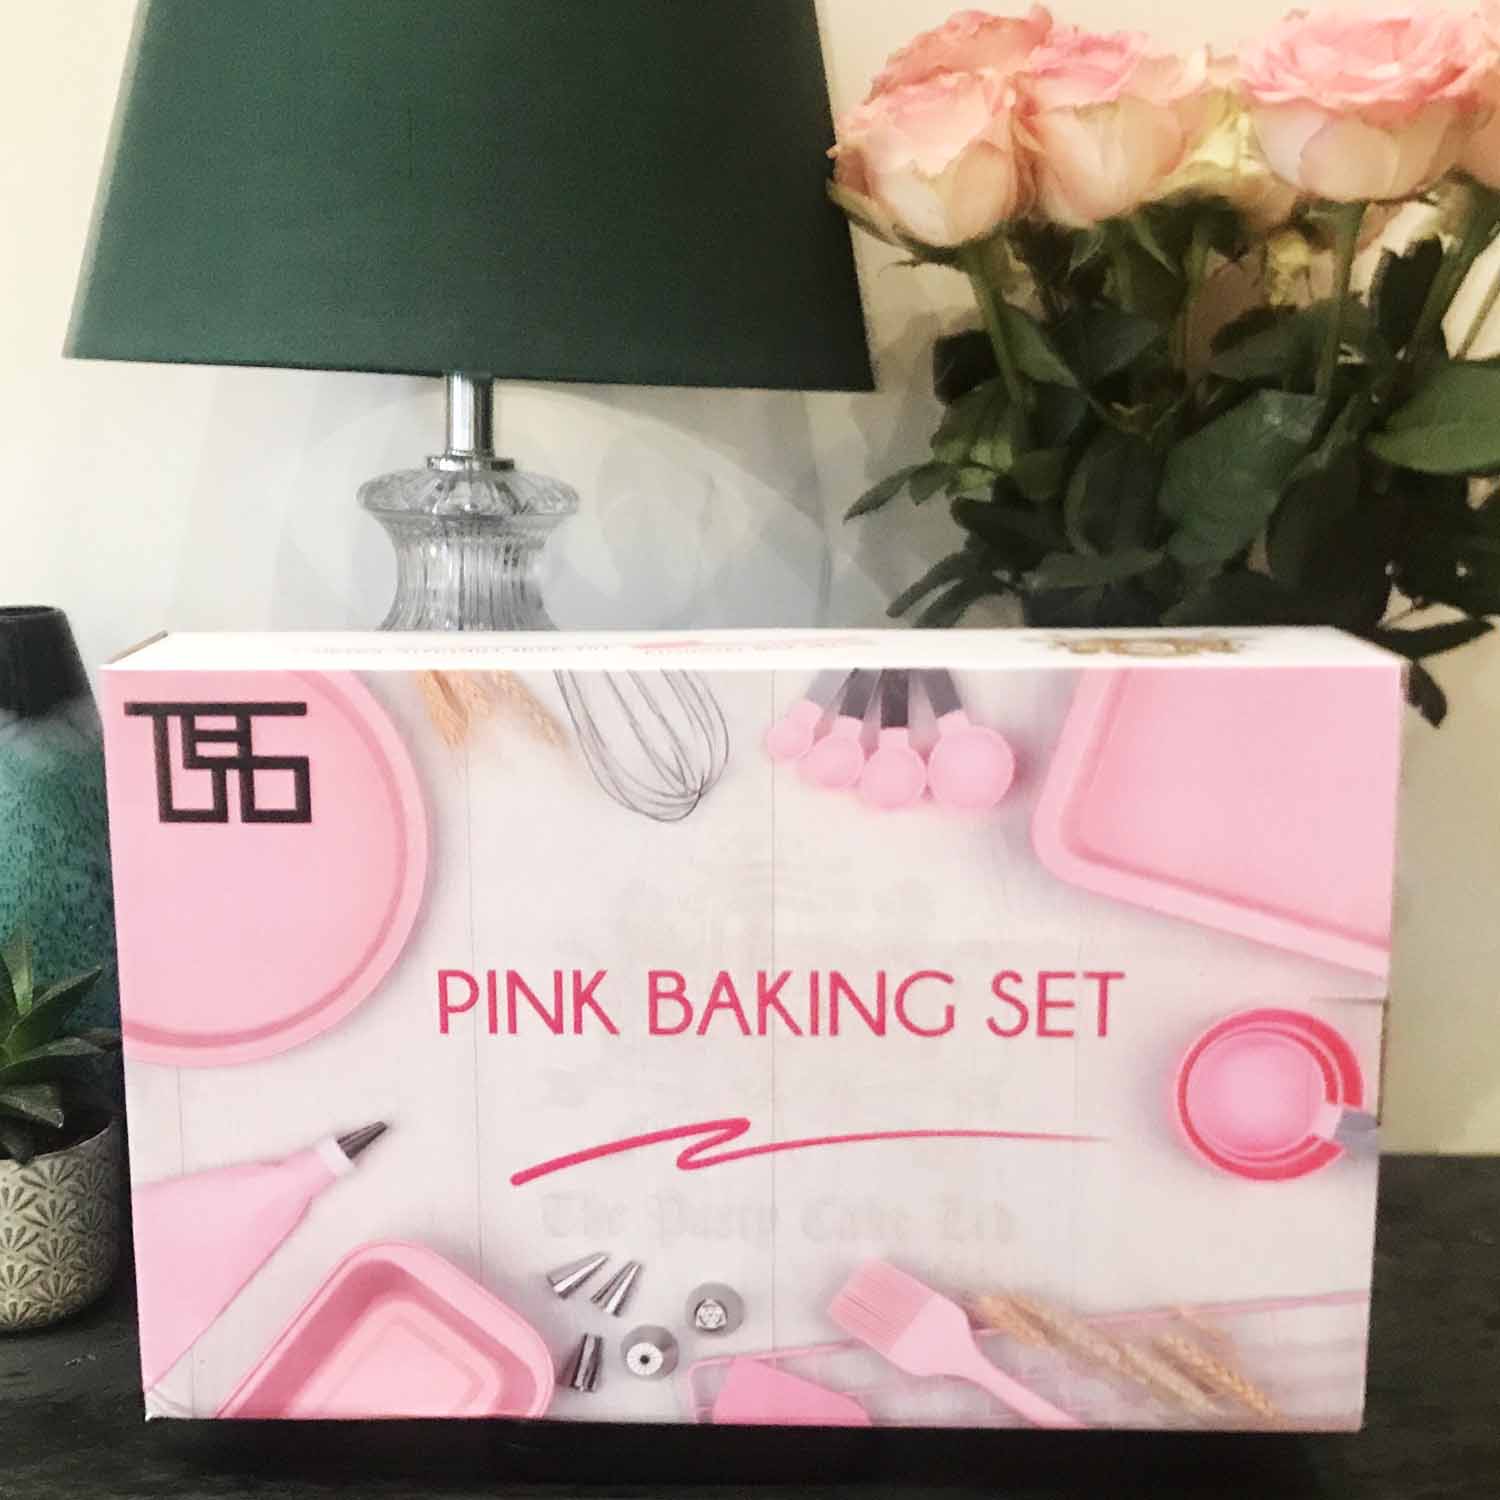 Featured image for “The Pink Baking Set”